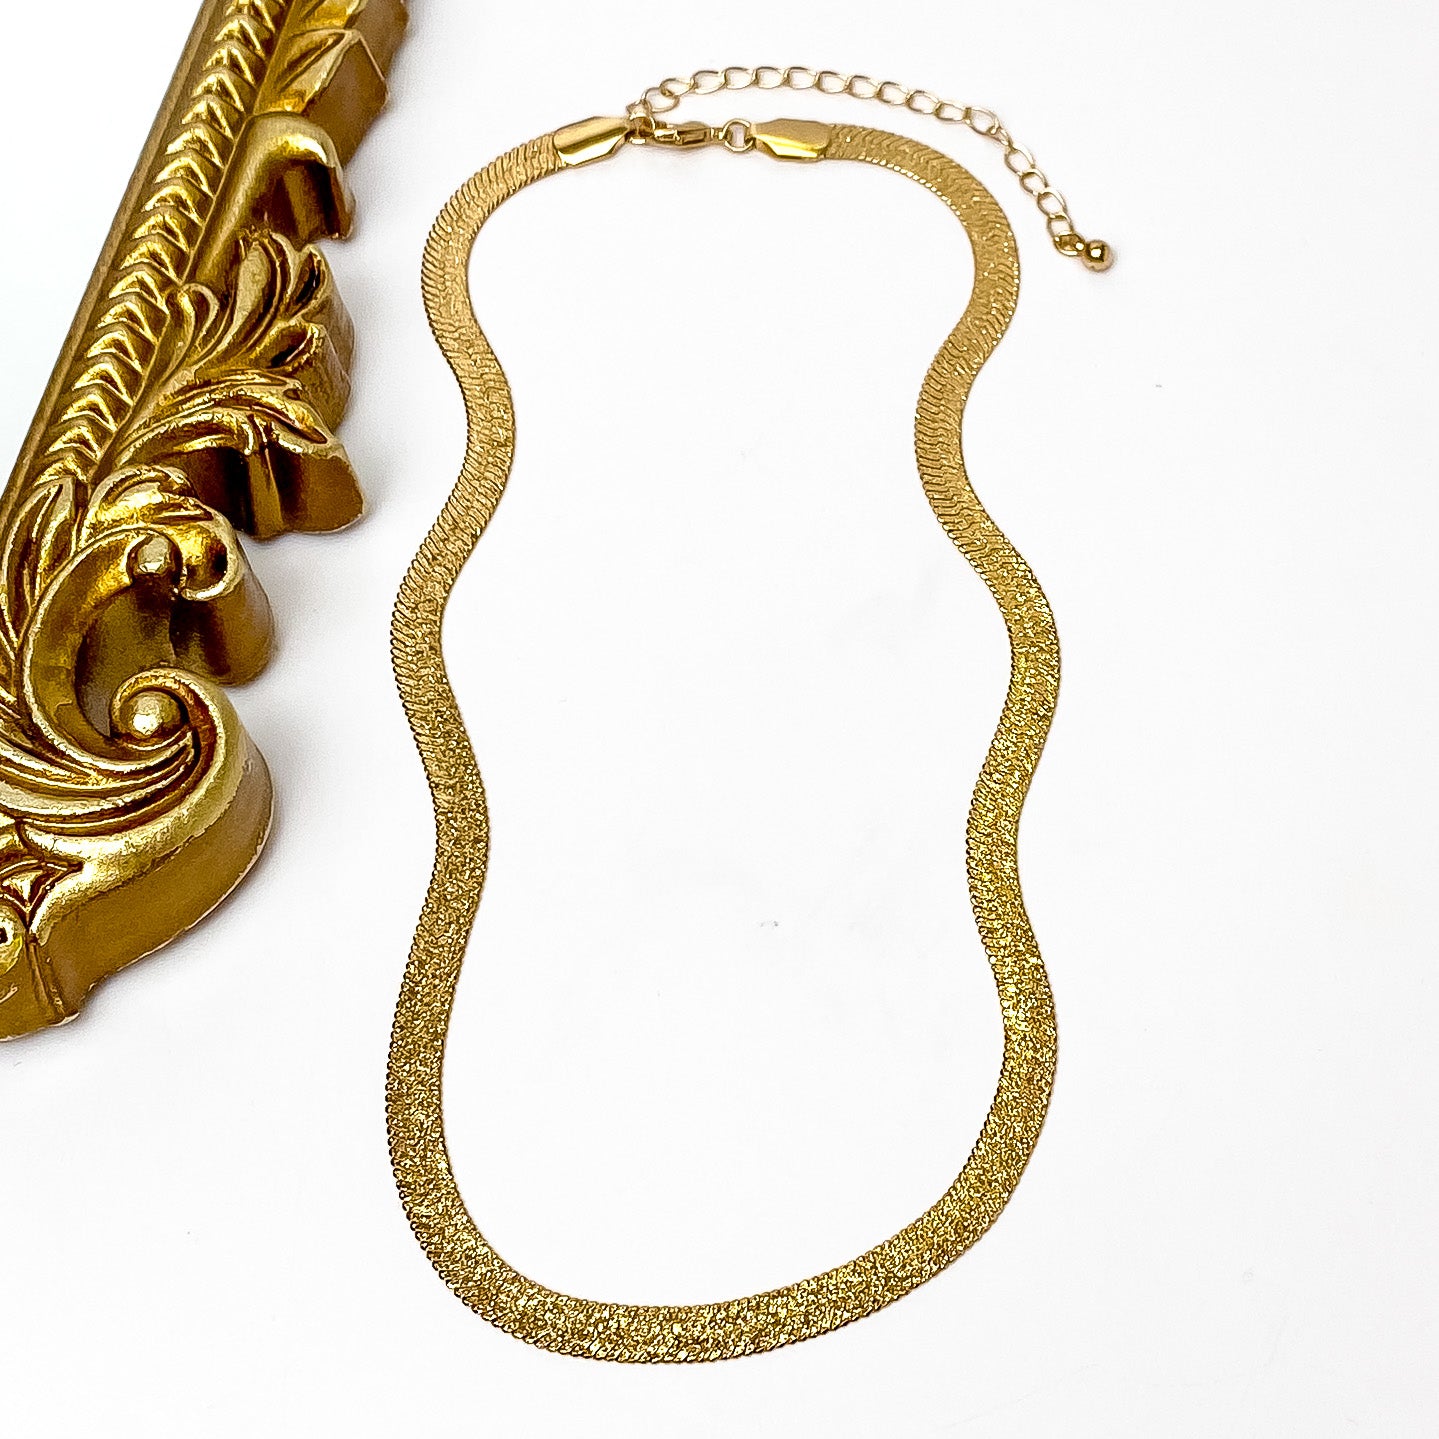 Gold herringbone chain necklace with a gold necklace adjuster. This necklace is pictured on a white background with a gold mirror on the left side. 